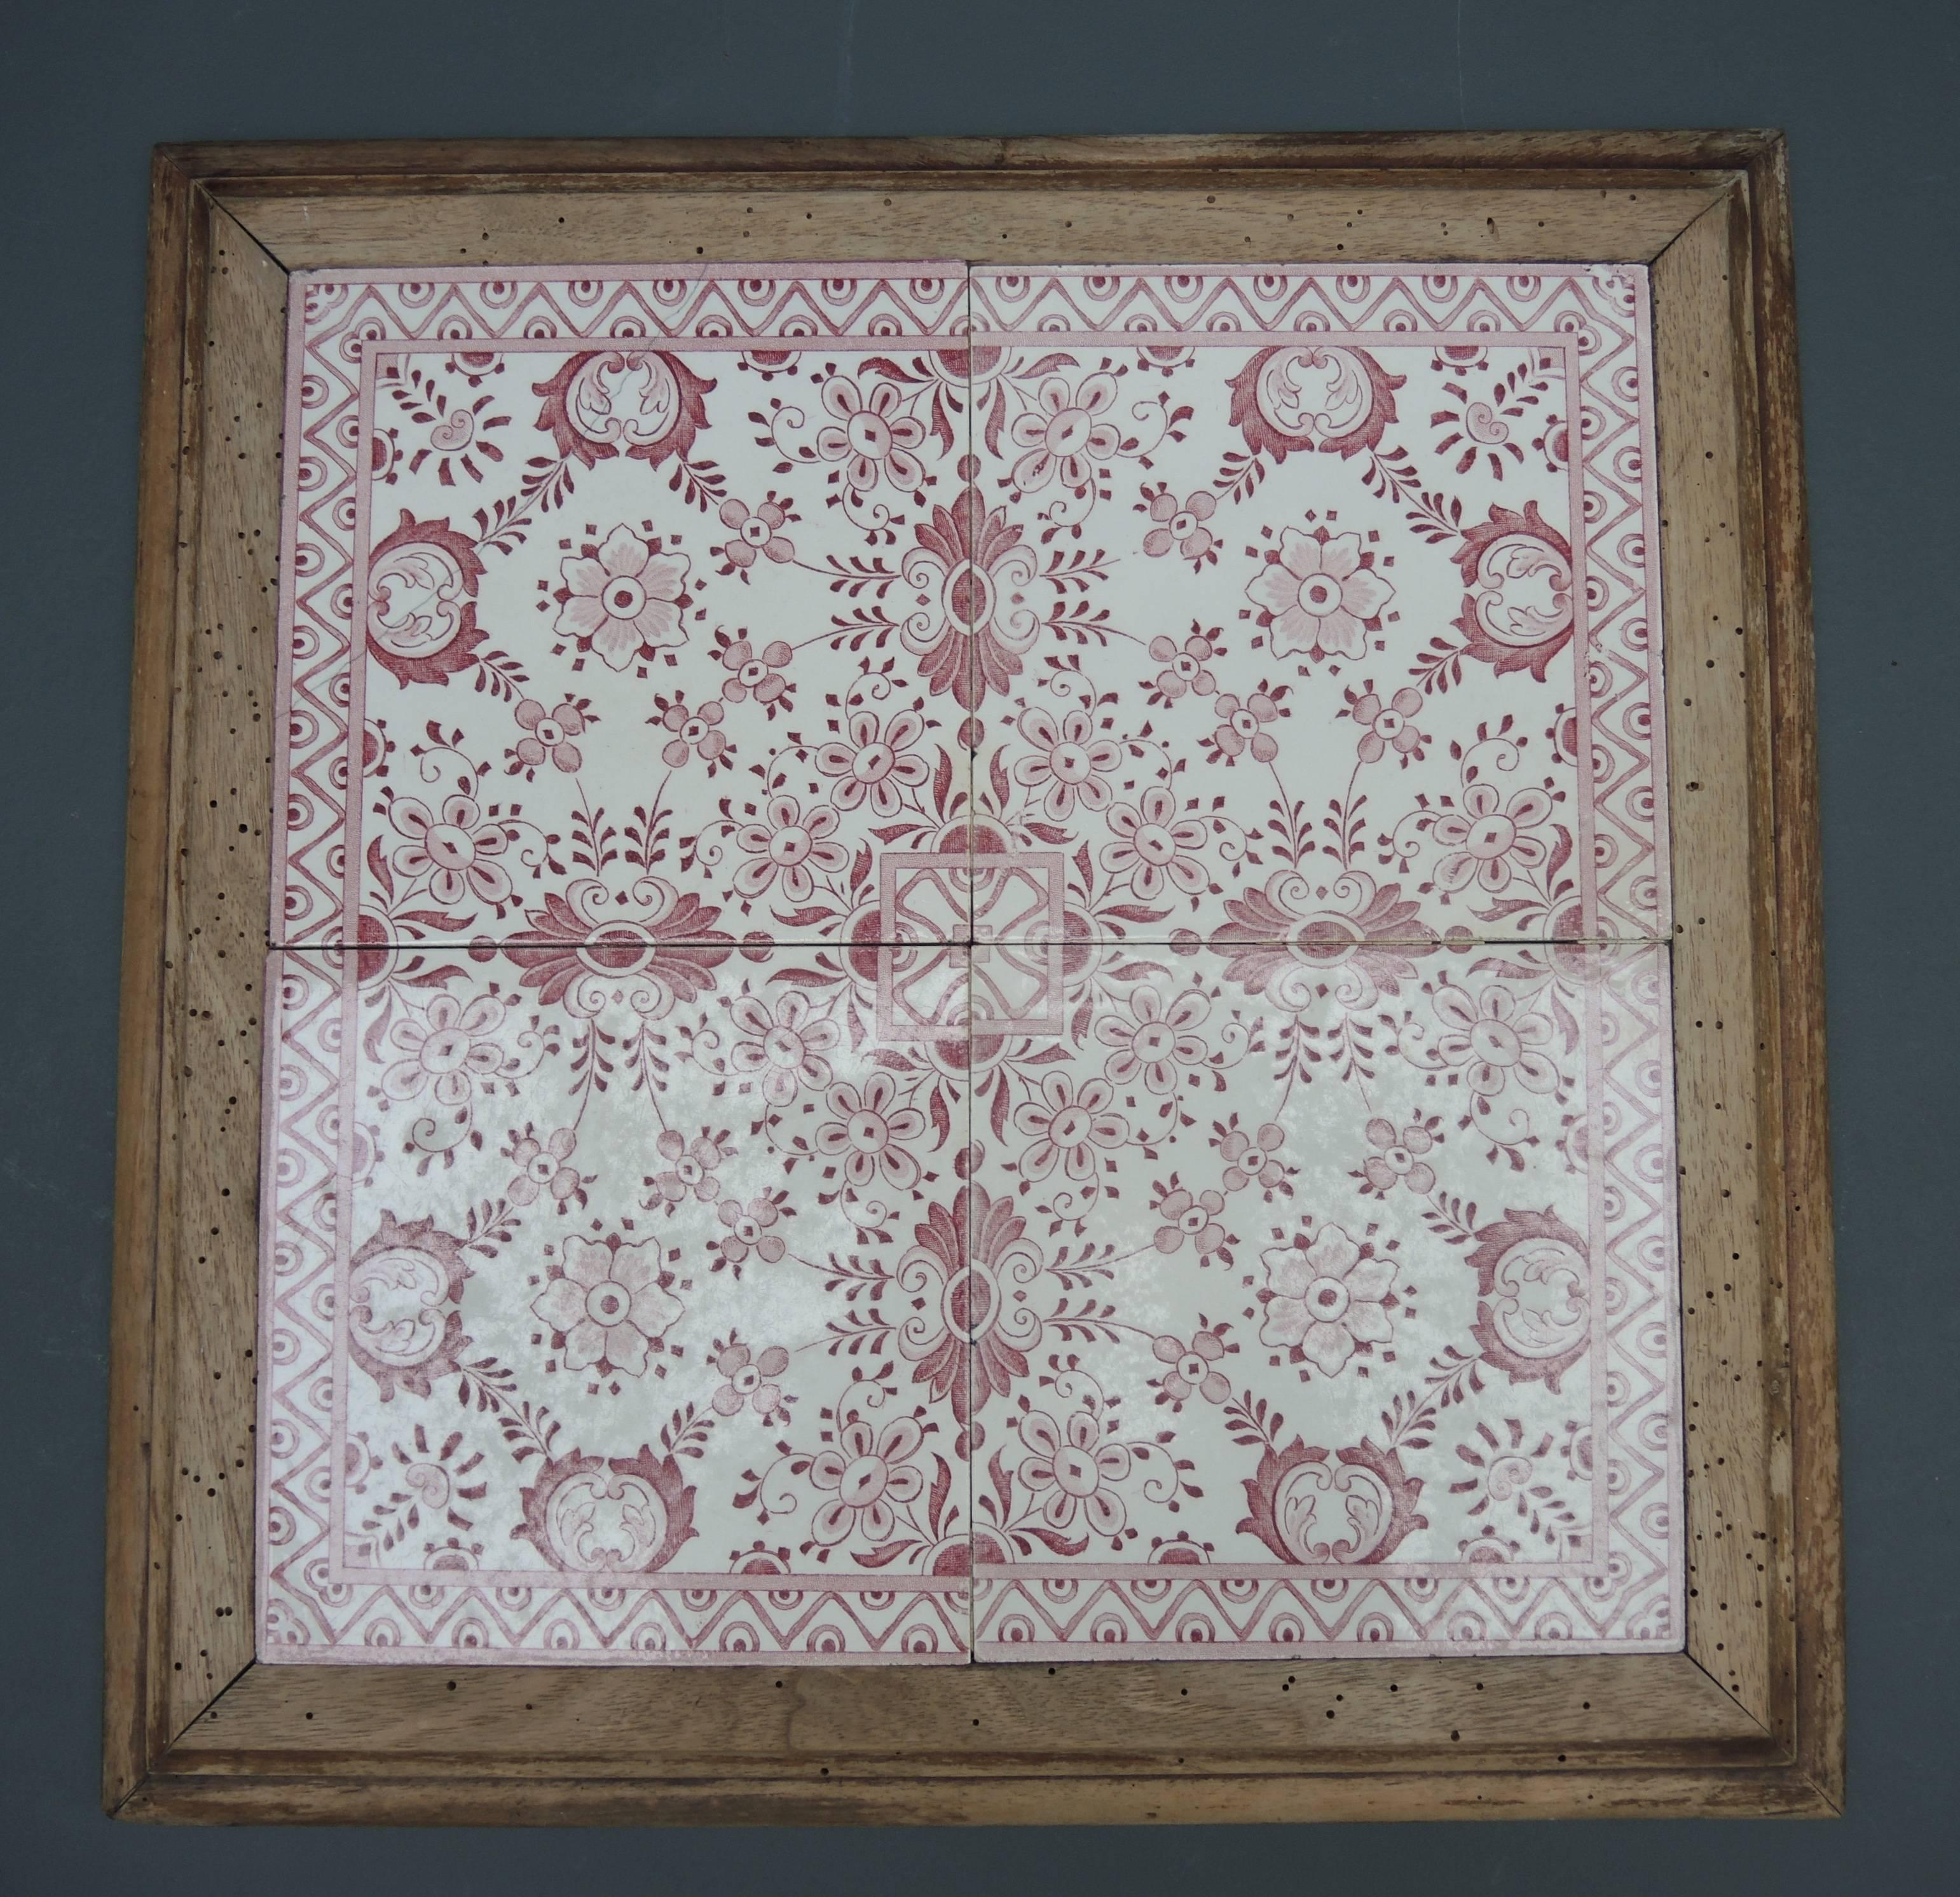 Red and white transfer ware tiles set into a oakwood frame lend the perfect country aire to this antique cheese serving tray from the Belgian countryside of West Flanders.